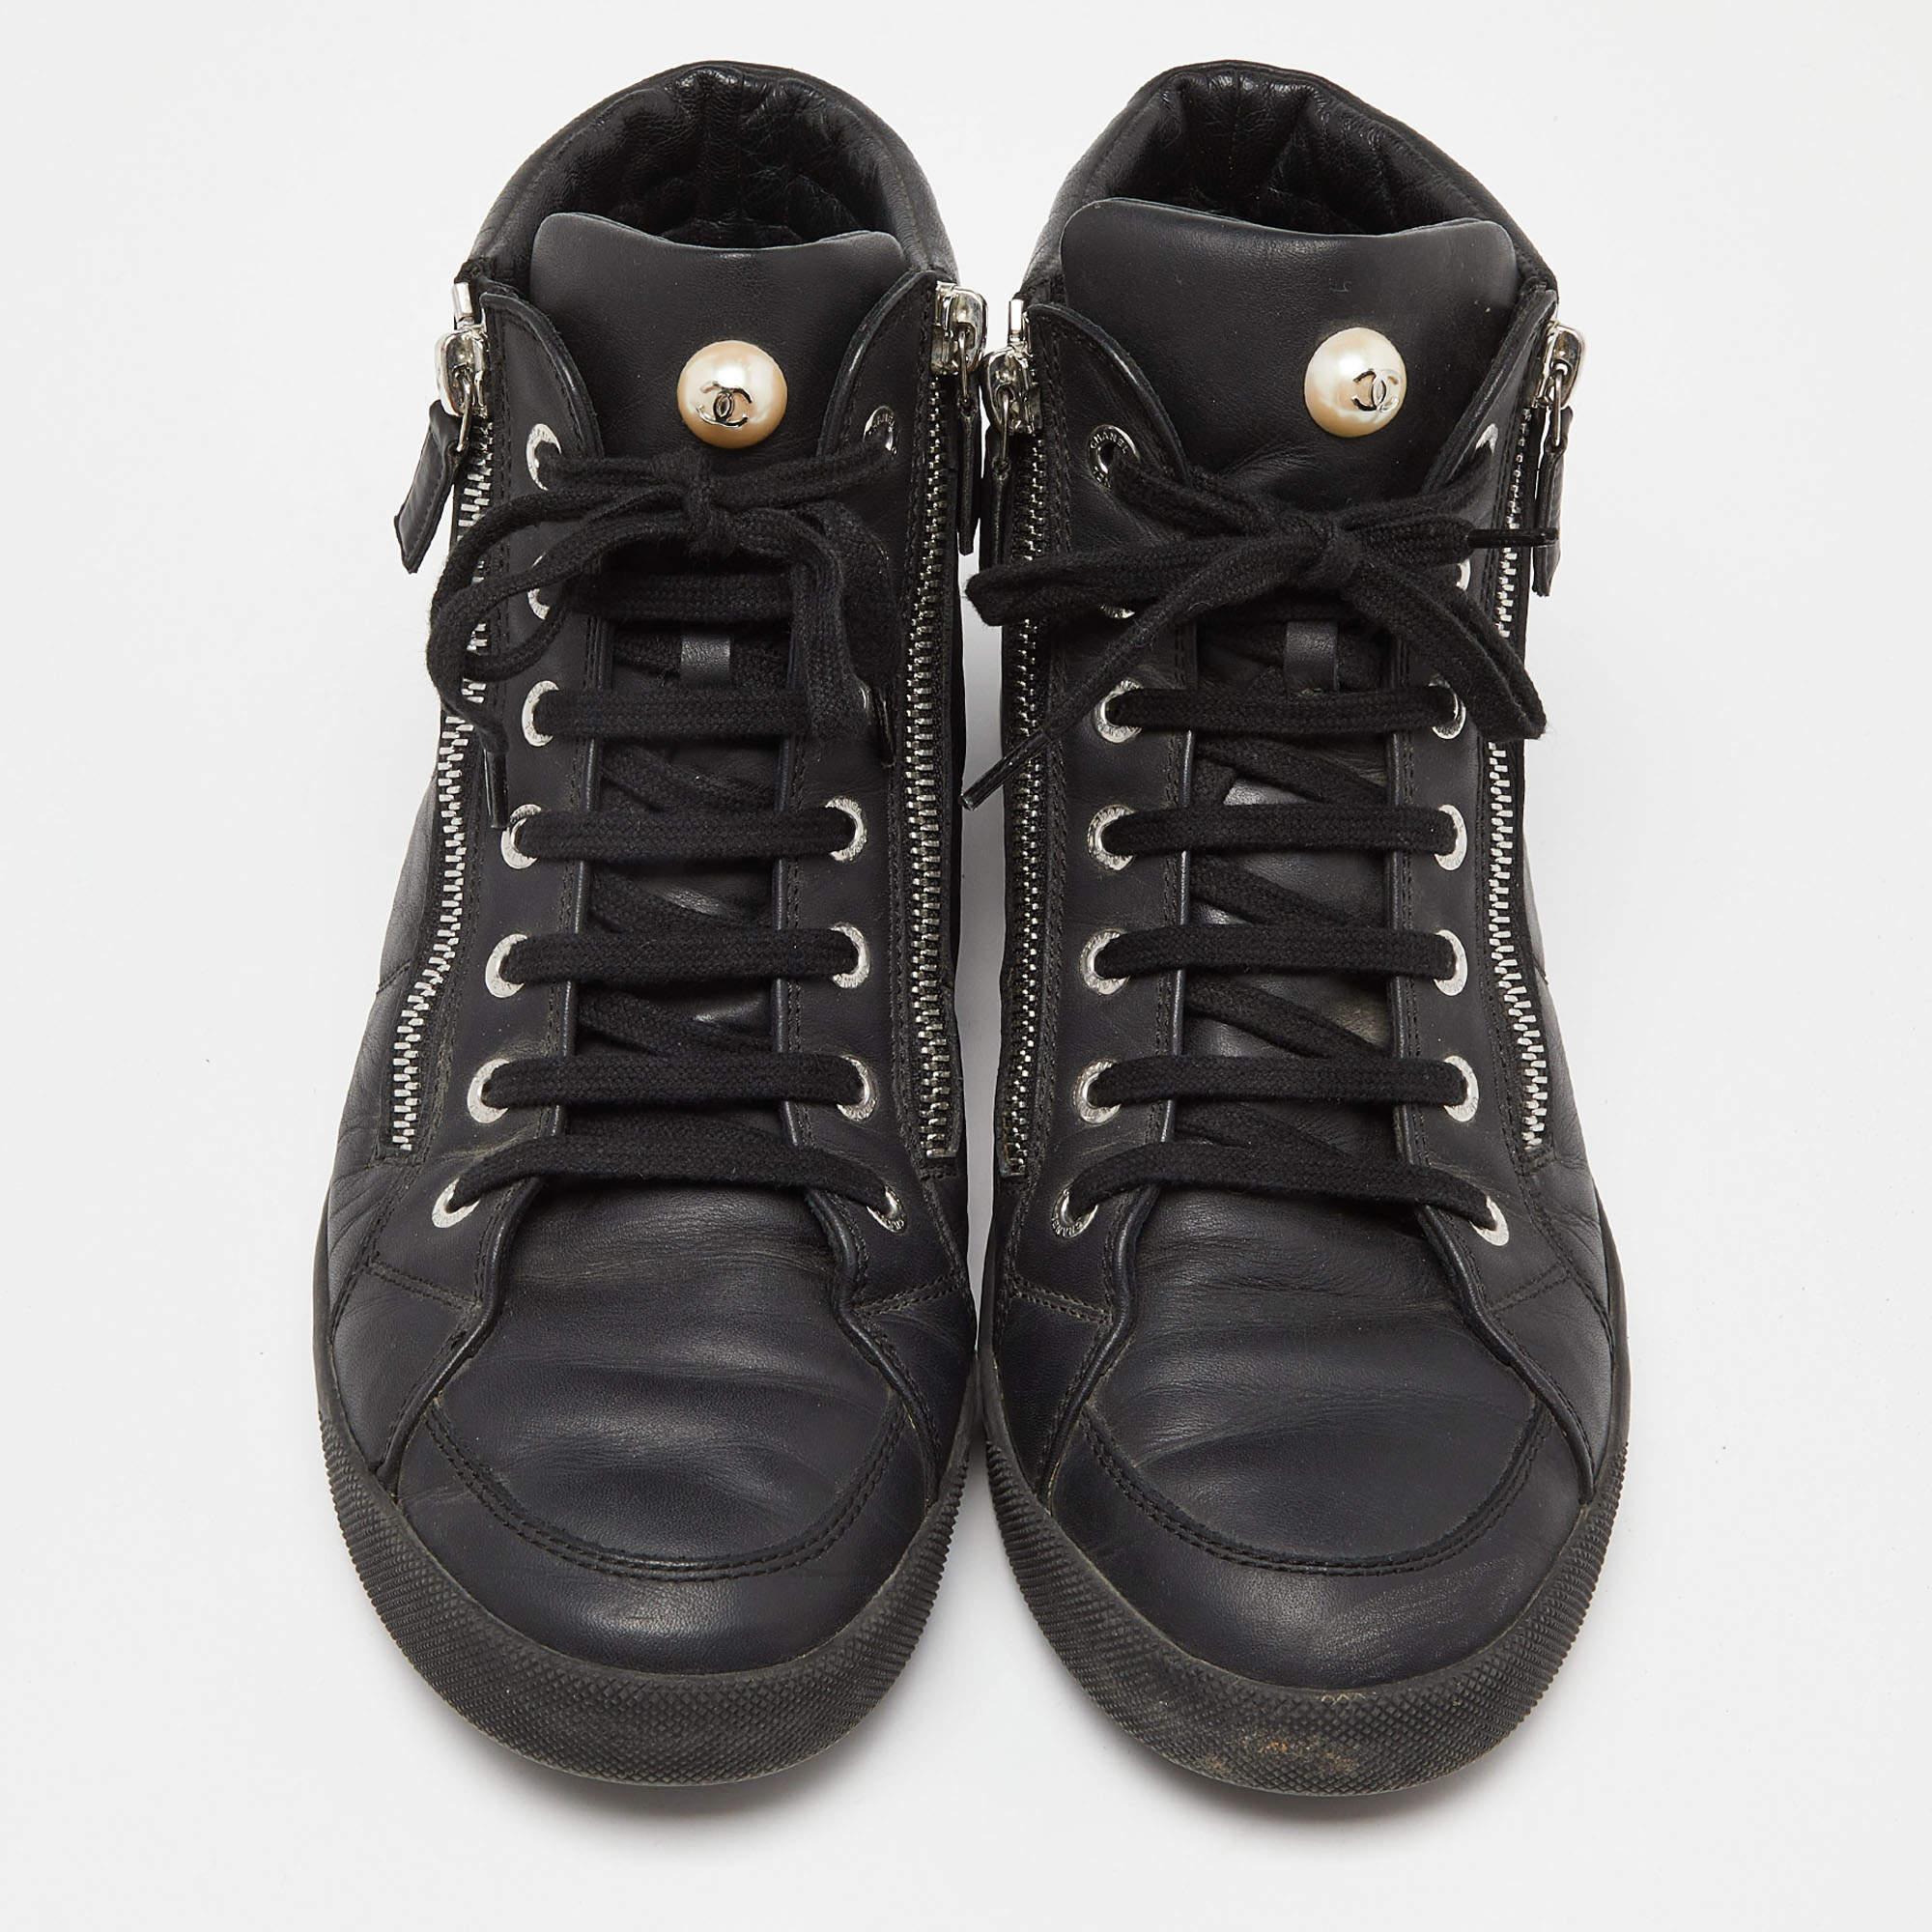 Chanel Black Leather CC Zip Link High Top Sneakers Size 39.5 For Sale 1